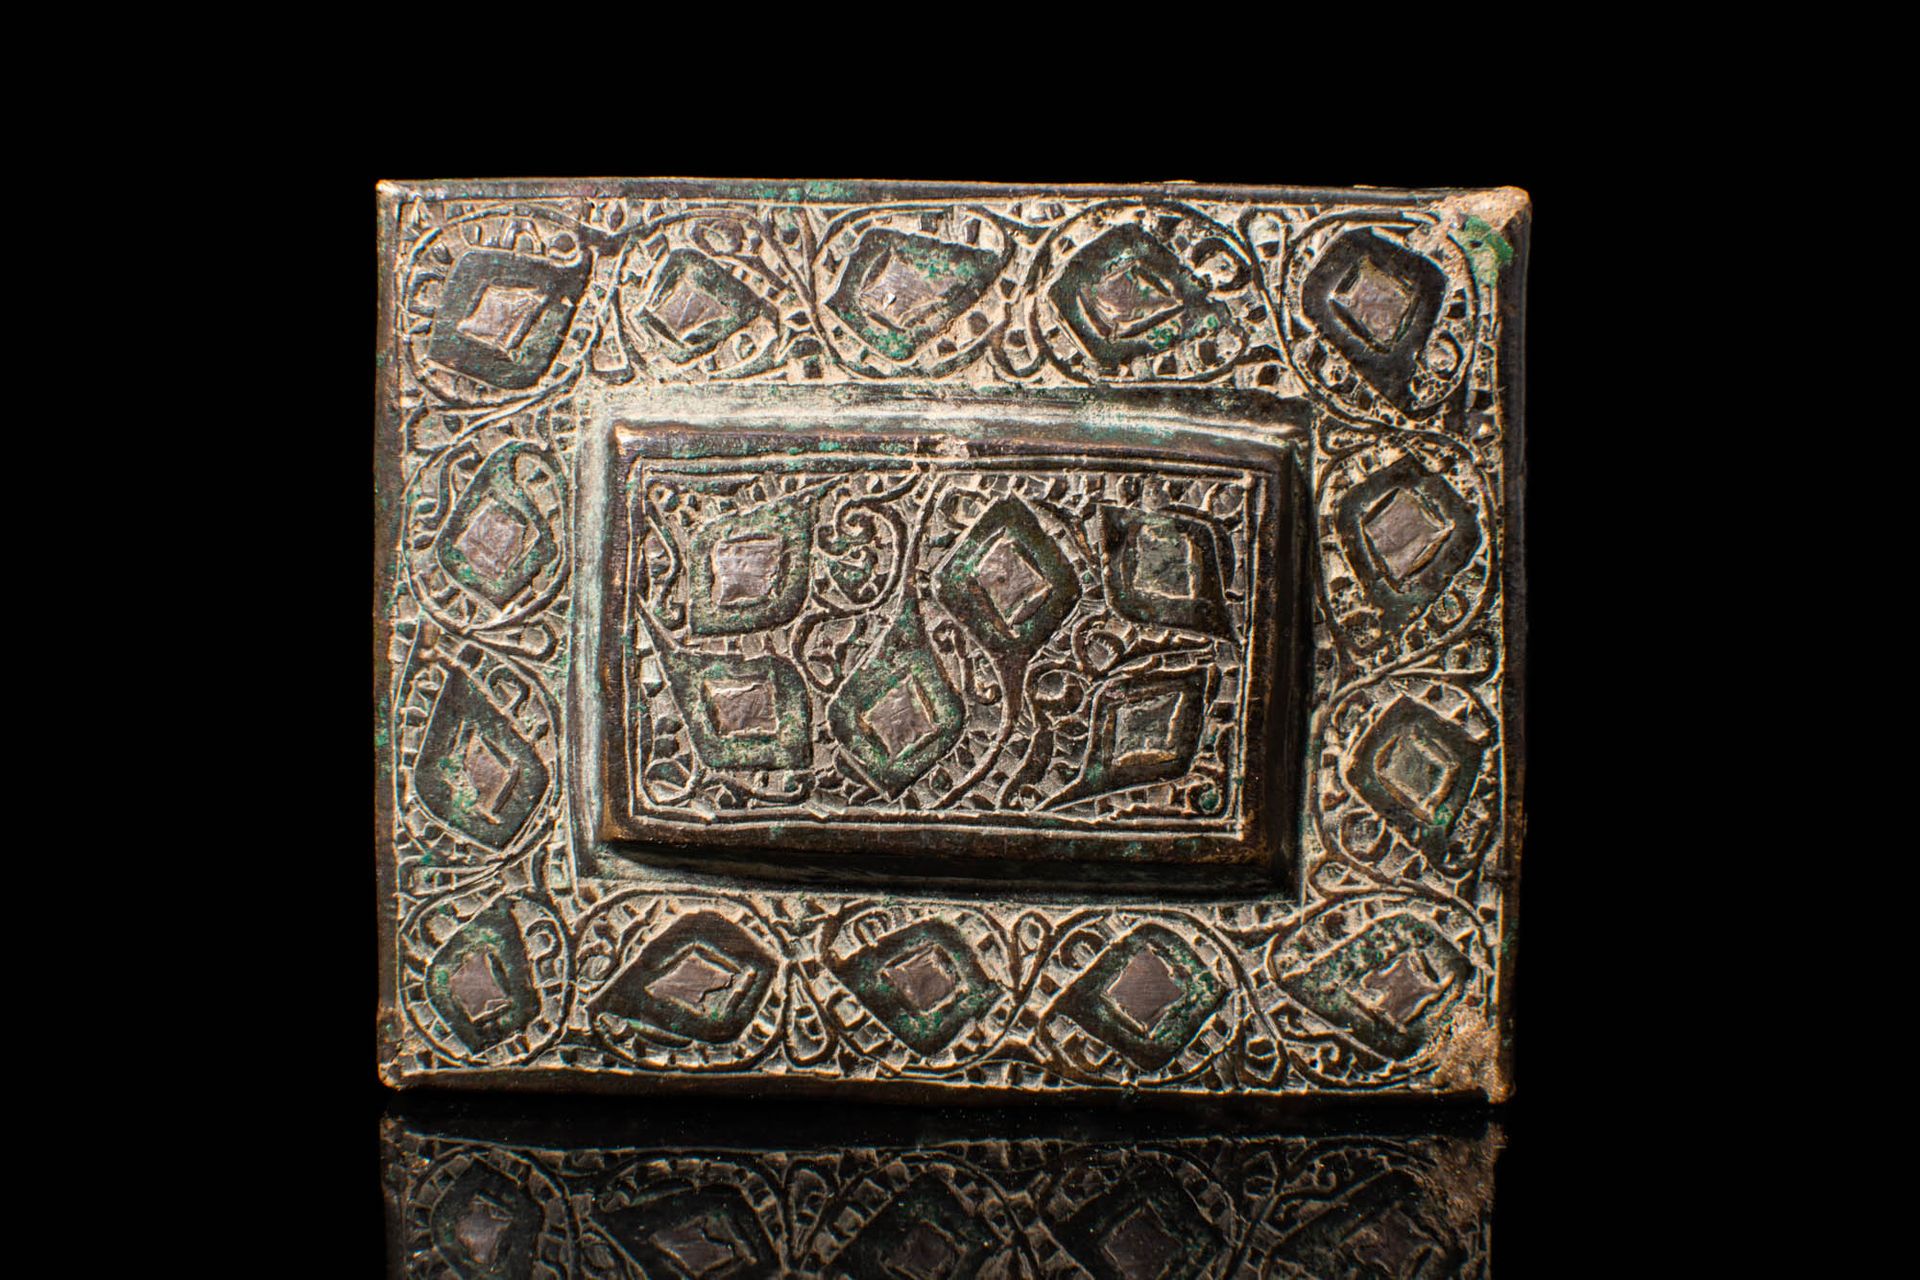 SAFAVID BOX COVER DECORATED WITH FLORAL MOTIFS Ca. AD 1500 - 1600.
A Safavid met&hellip;